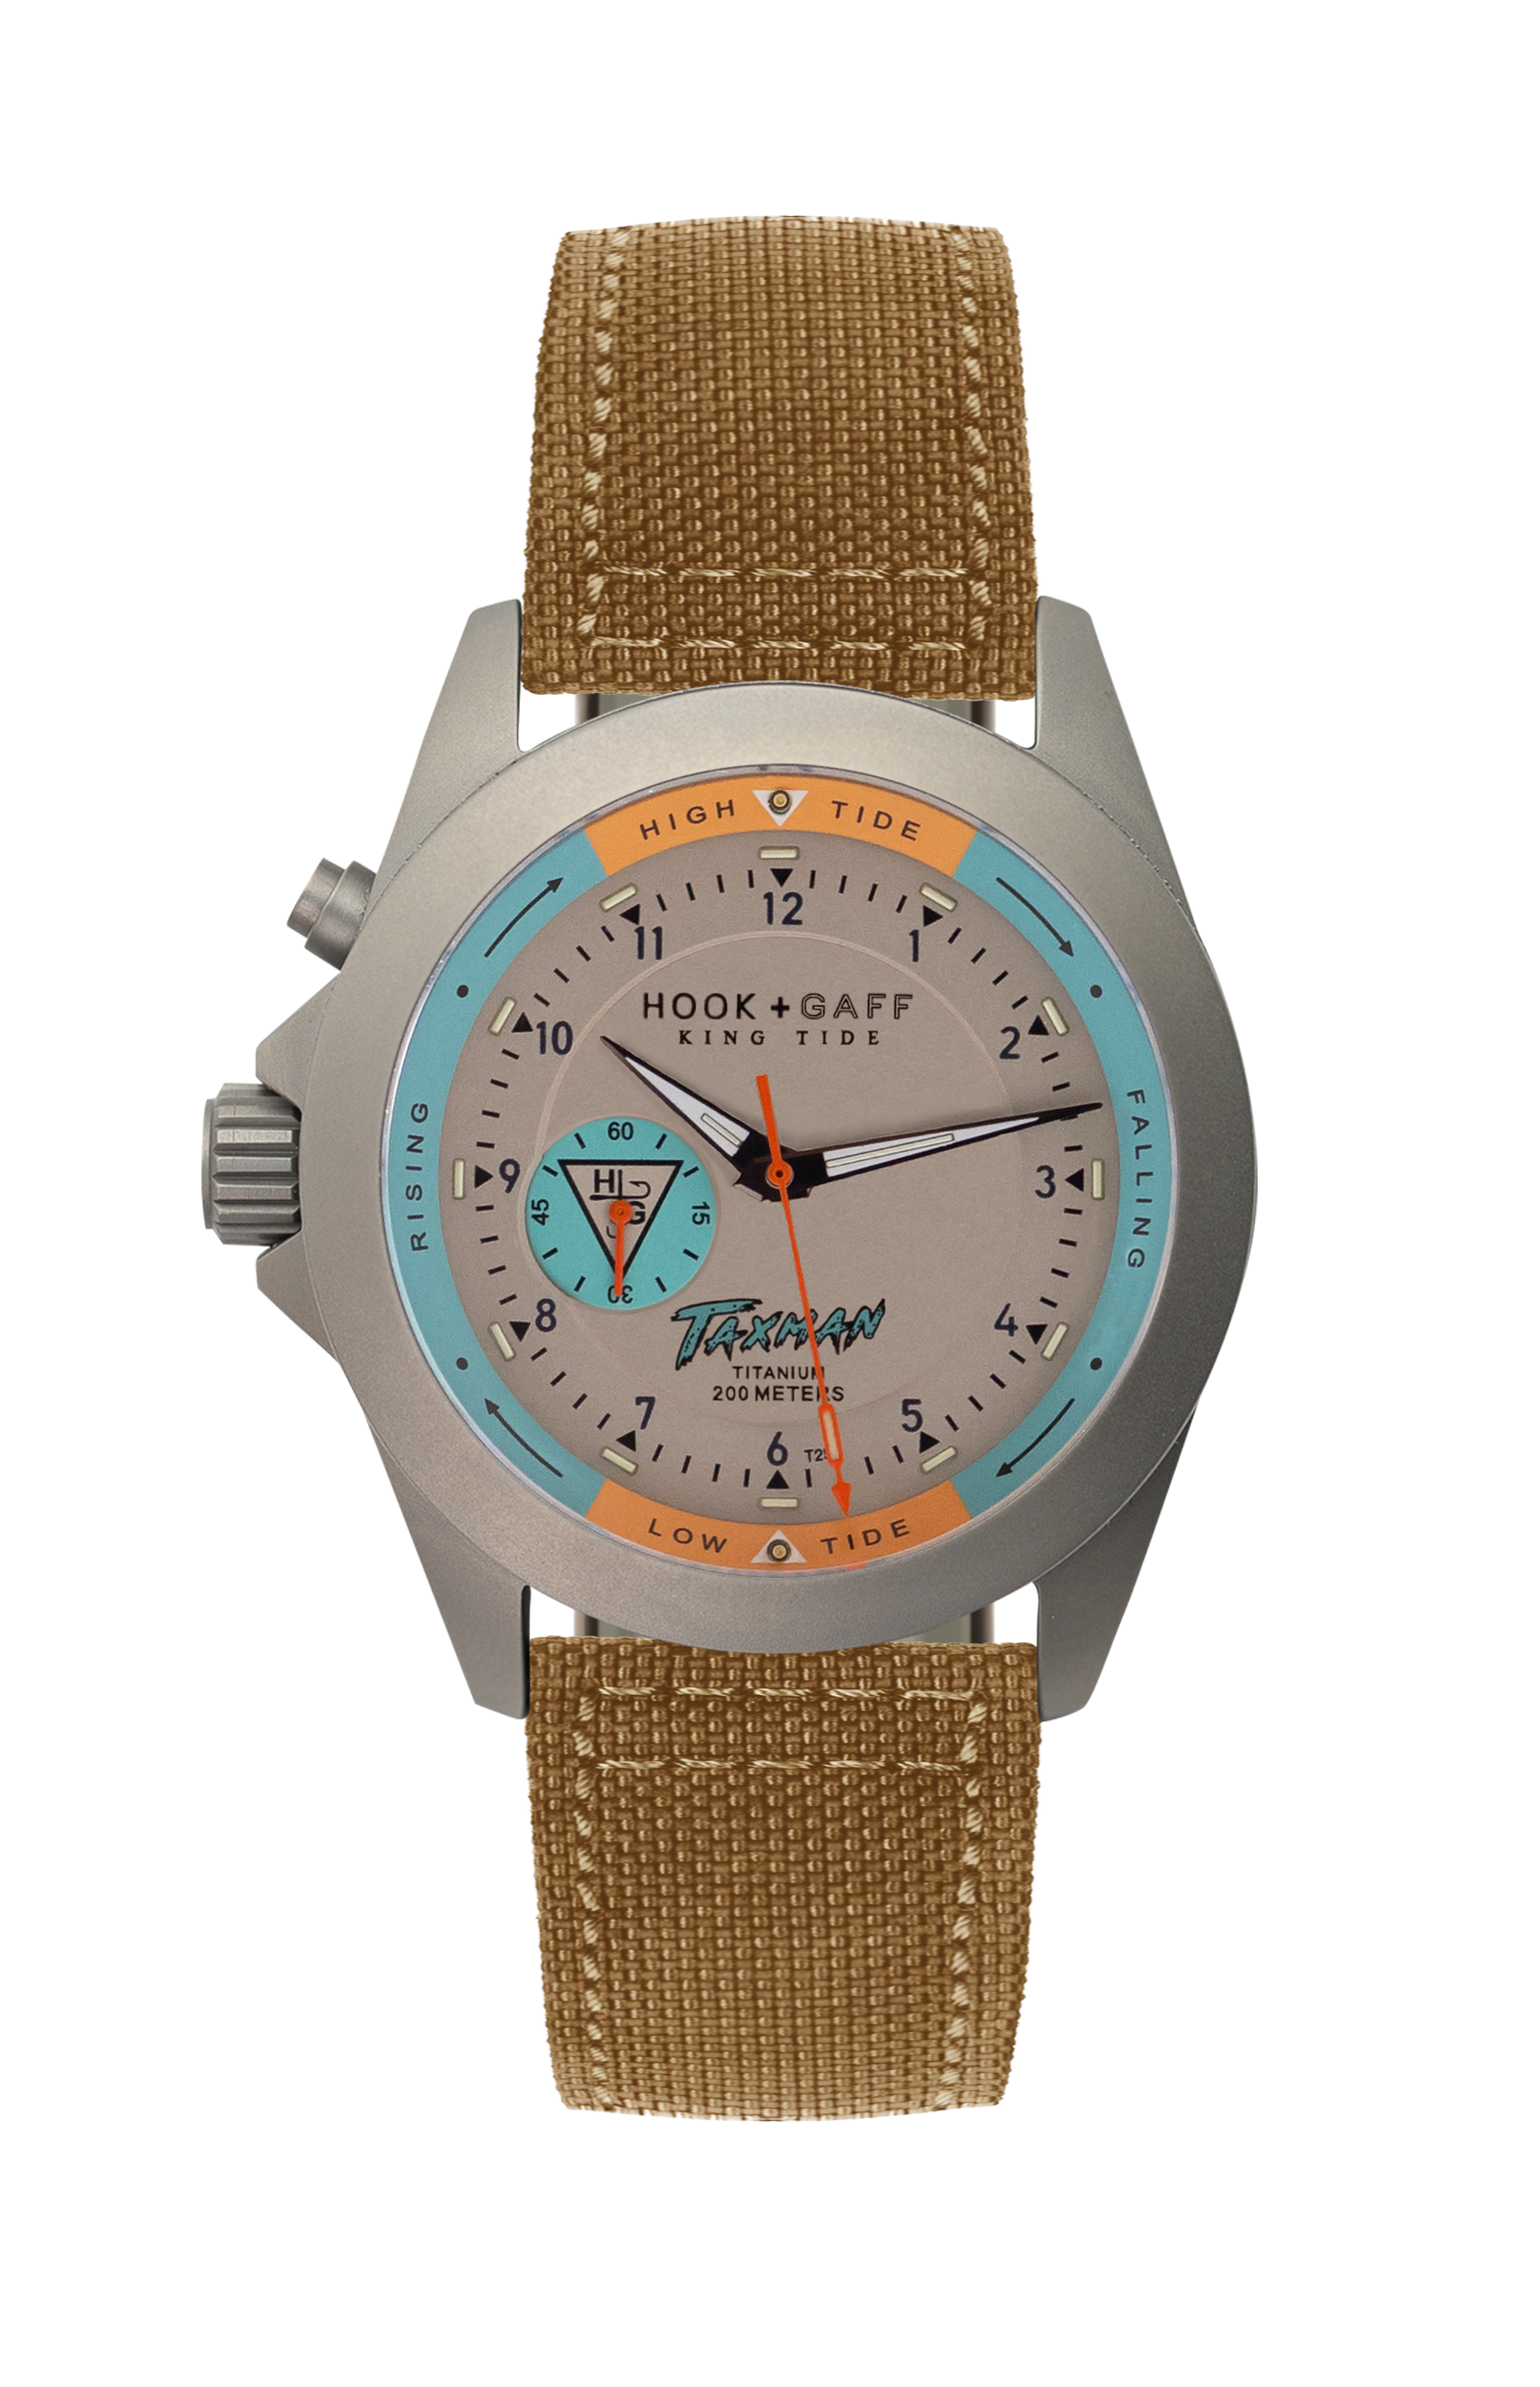 New! King Tide Watch - Gray Dial